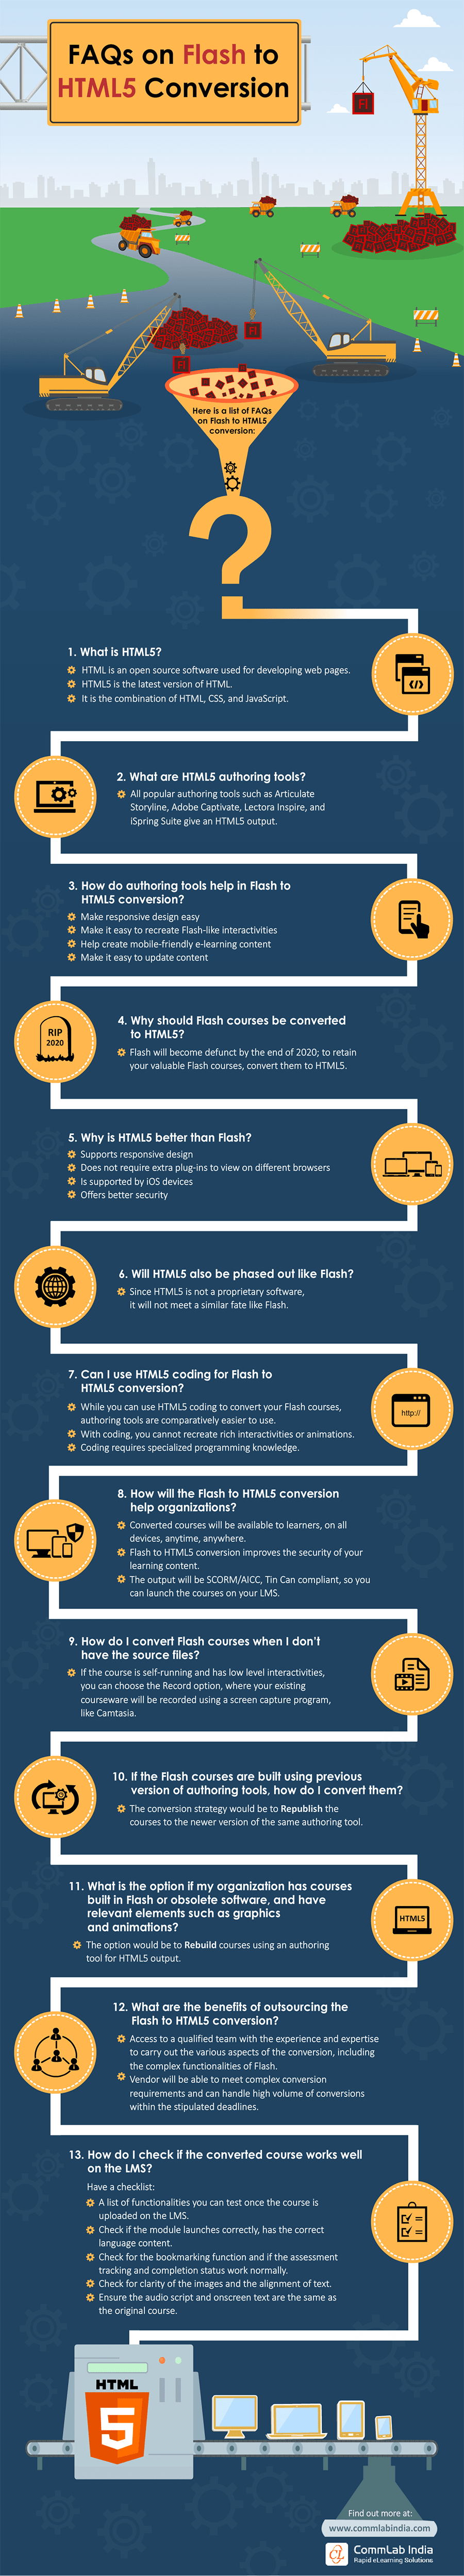 FAQs on Converting Flash to HTML5 [Infographic]